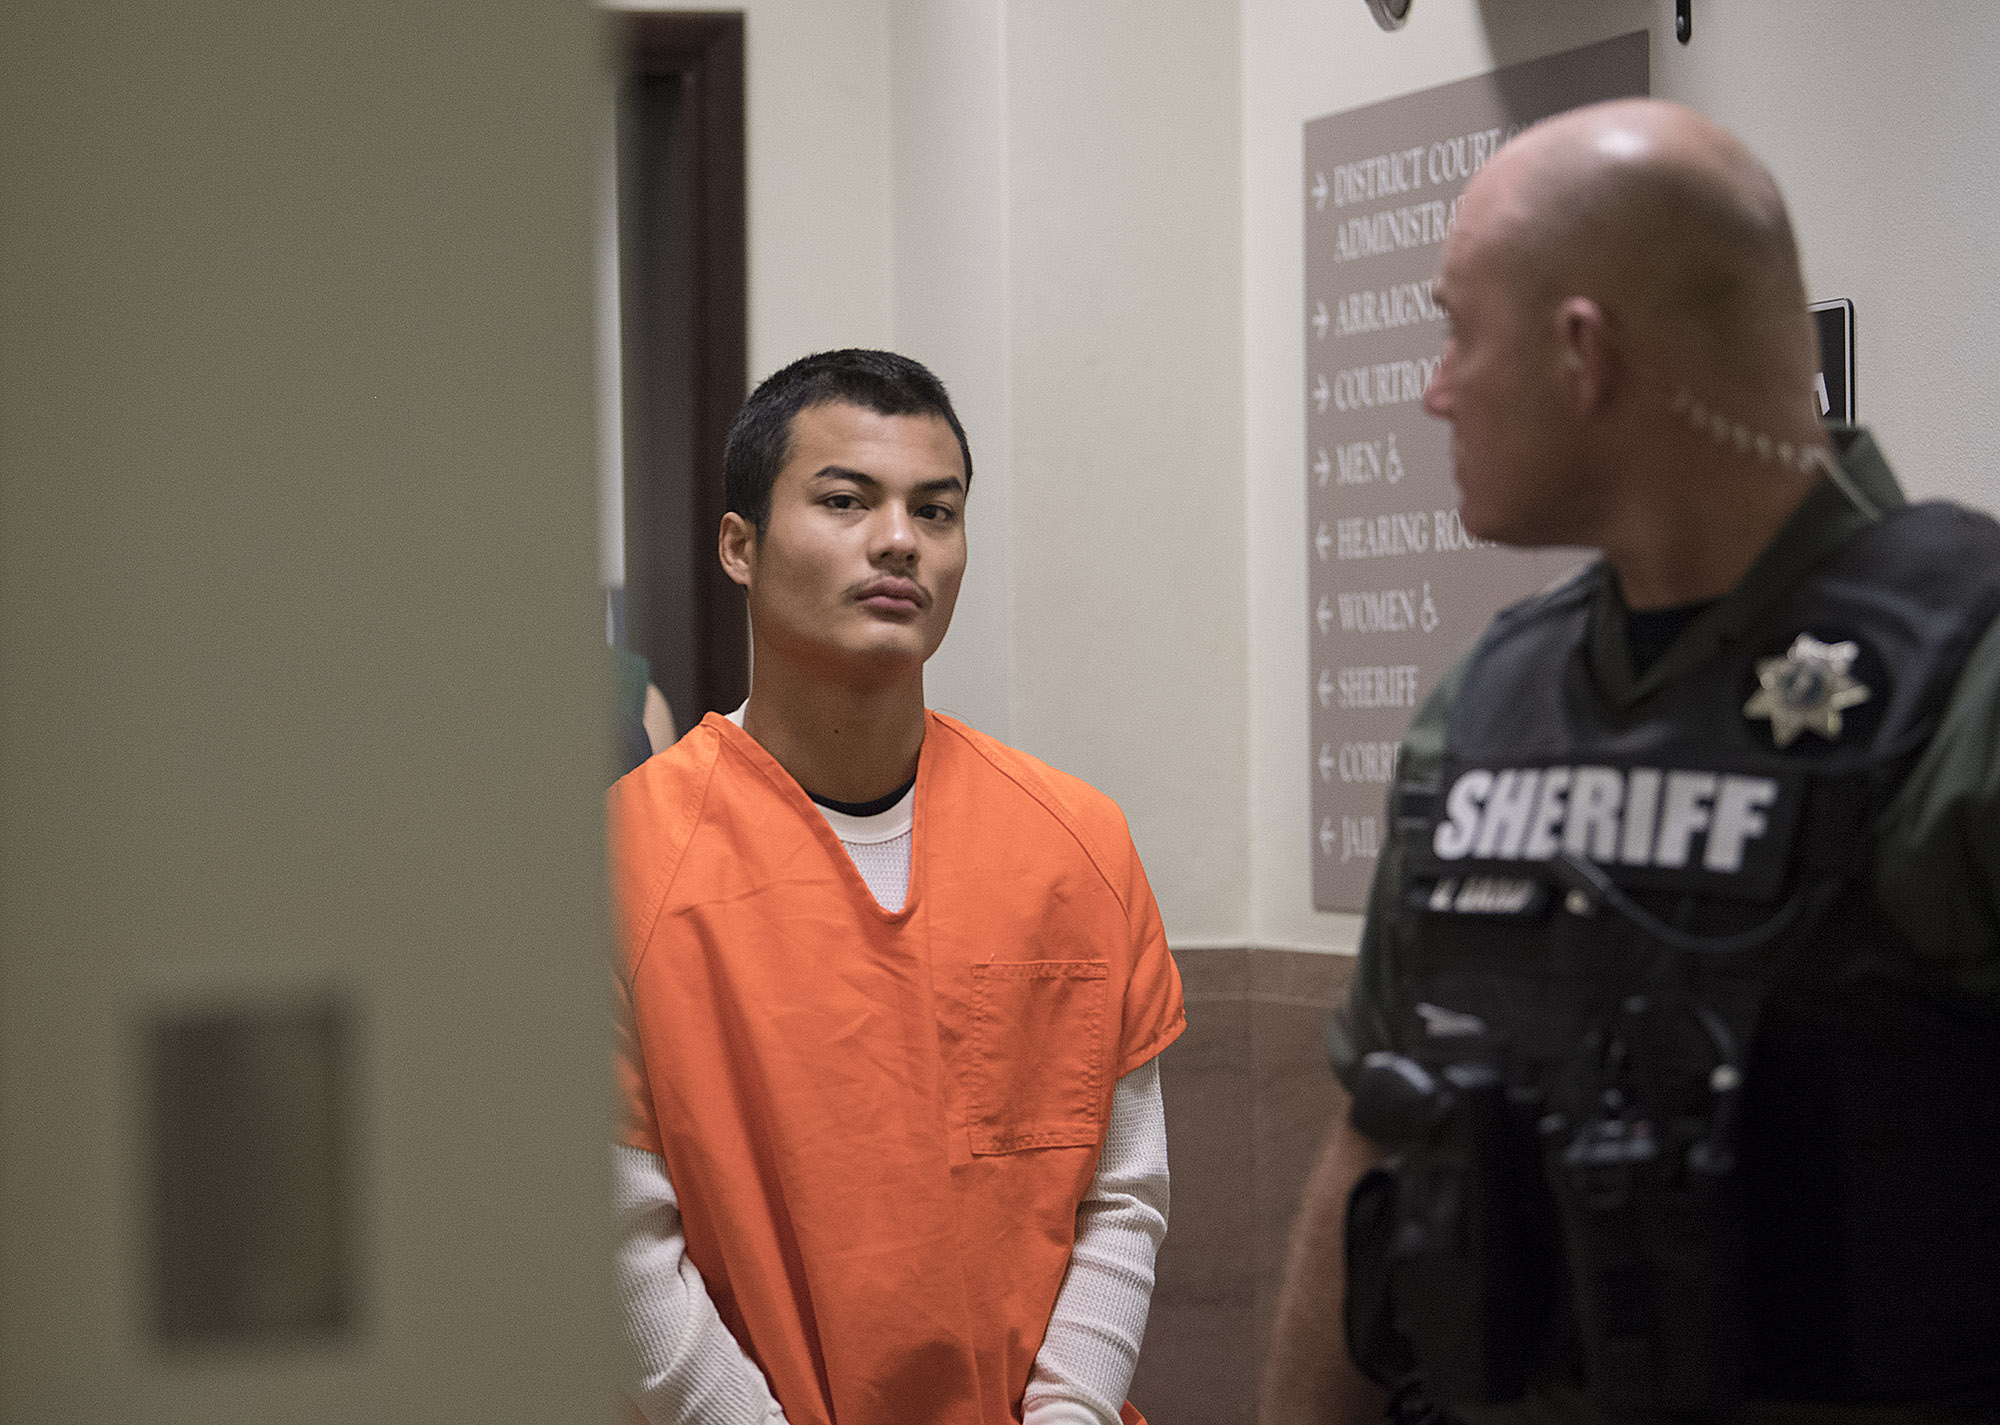 Mitchell Heng, who's accused in the Sifton Market homicide and arson last month, is escorted Wednesday morning, Feb. 1 to Clark County Superior Court to be arraigned on charges of first-degree murder, first-degree arson and first-degree robbery.